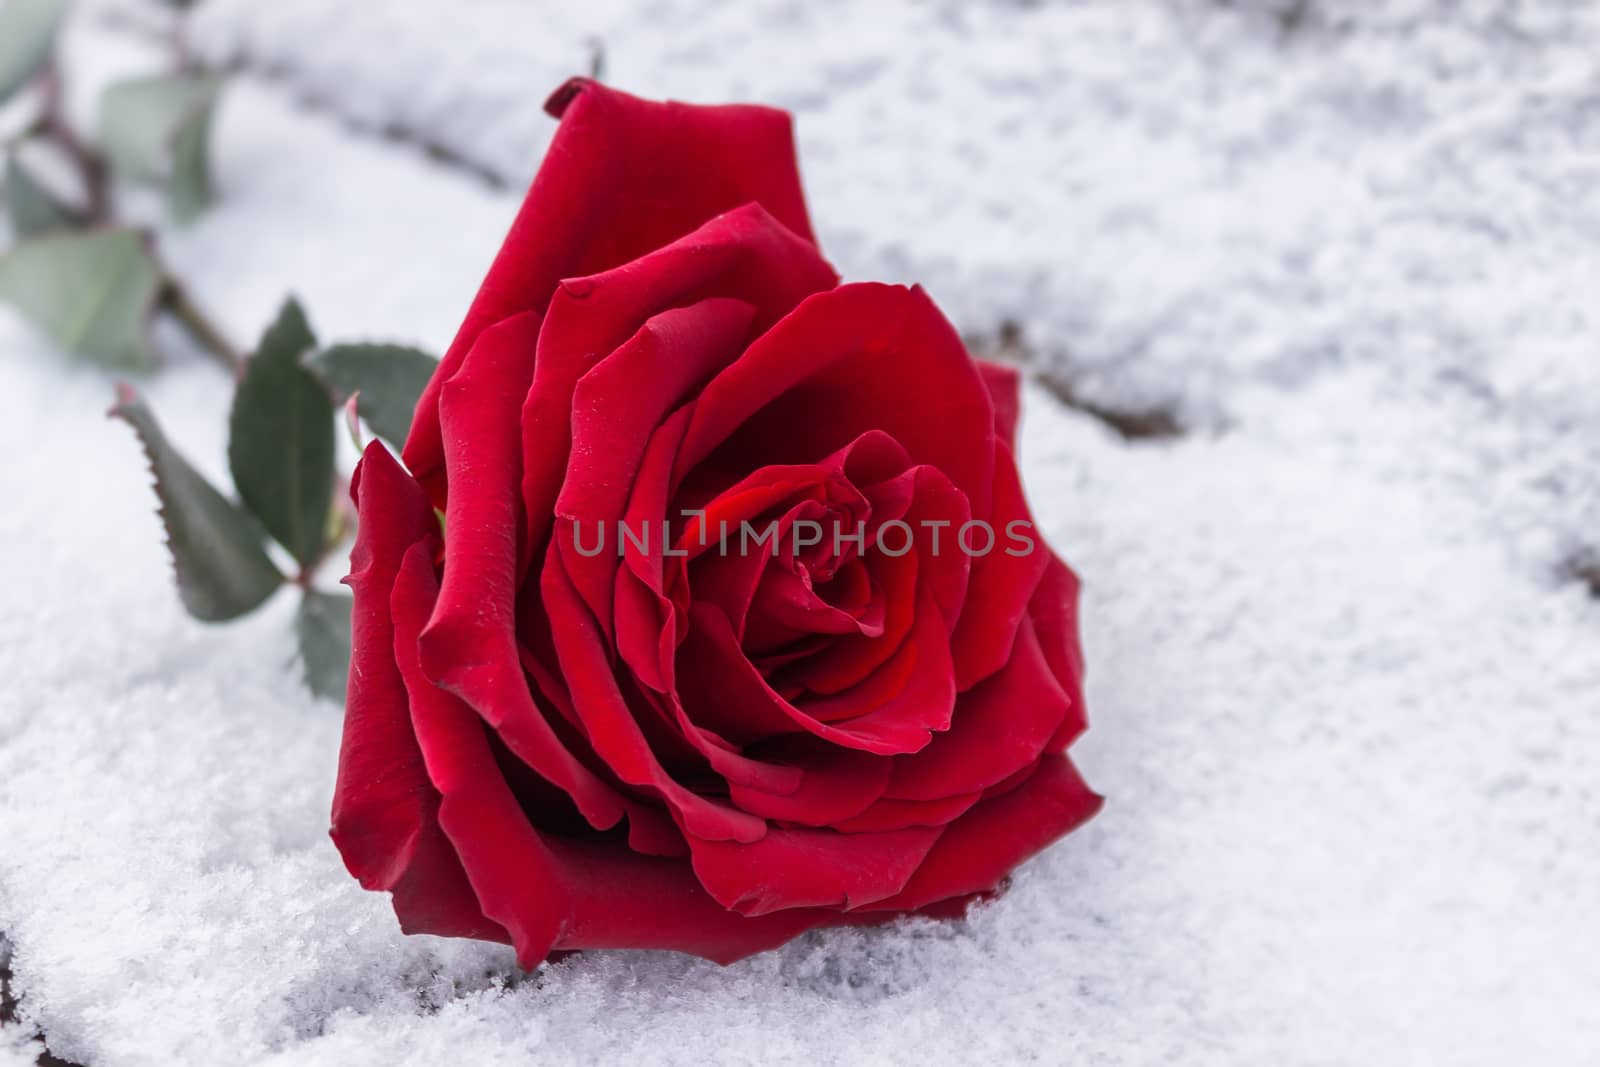 A close-up of a red rose bud lies in the cold snow in winter